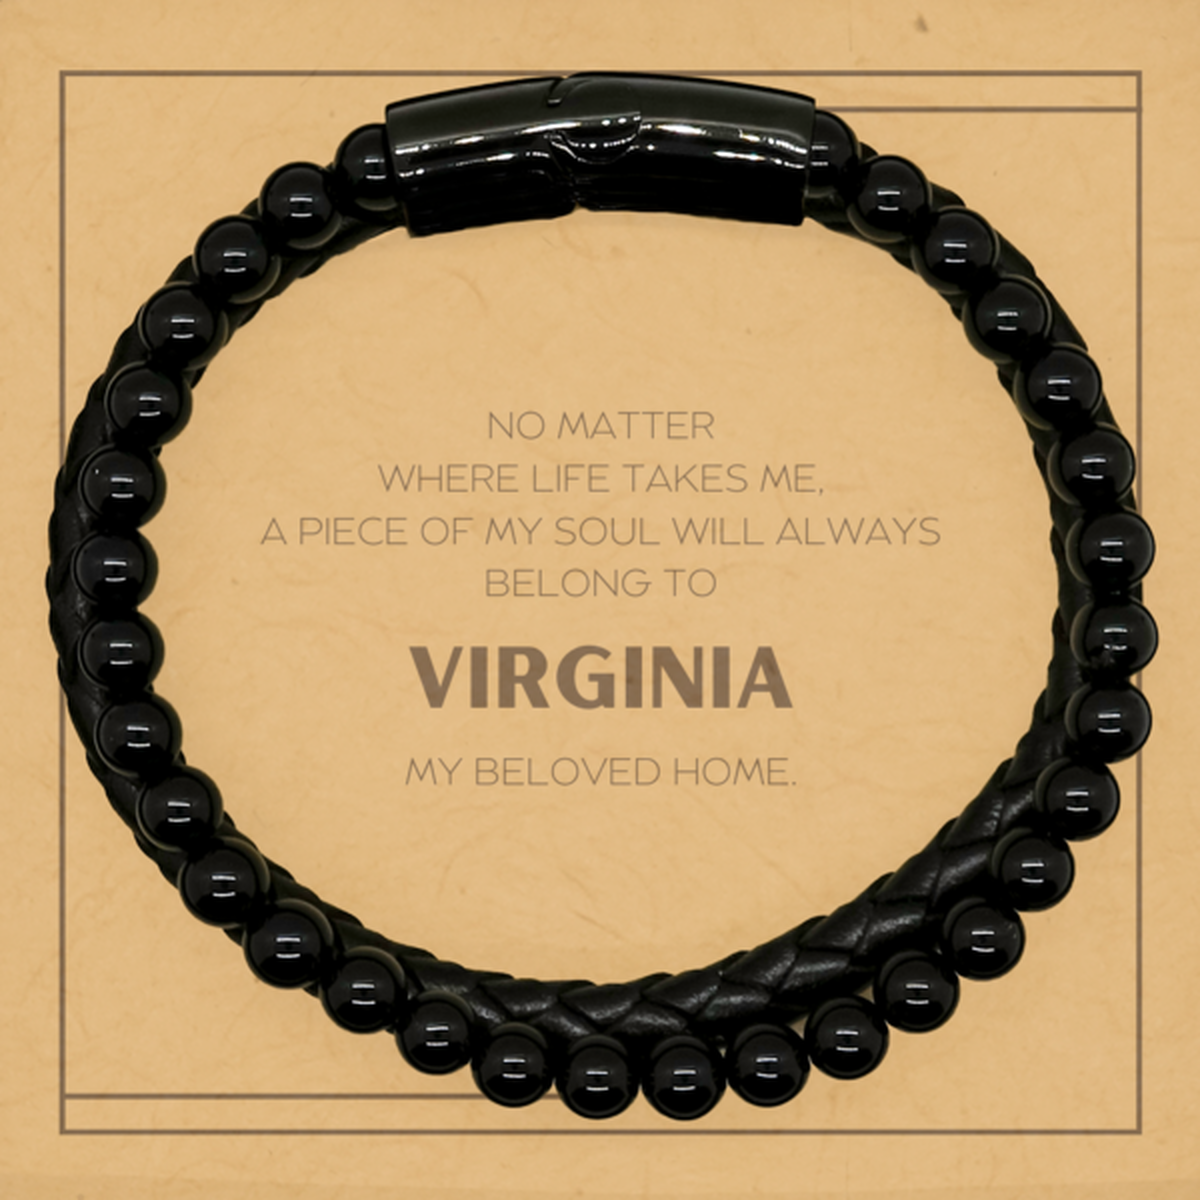 Love Virginia State Gifts, My soul will always belong to Virginia, Proud Stone Leather Bracelets, Birthday Unique Gifts For Virginia Men, Women, Friends